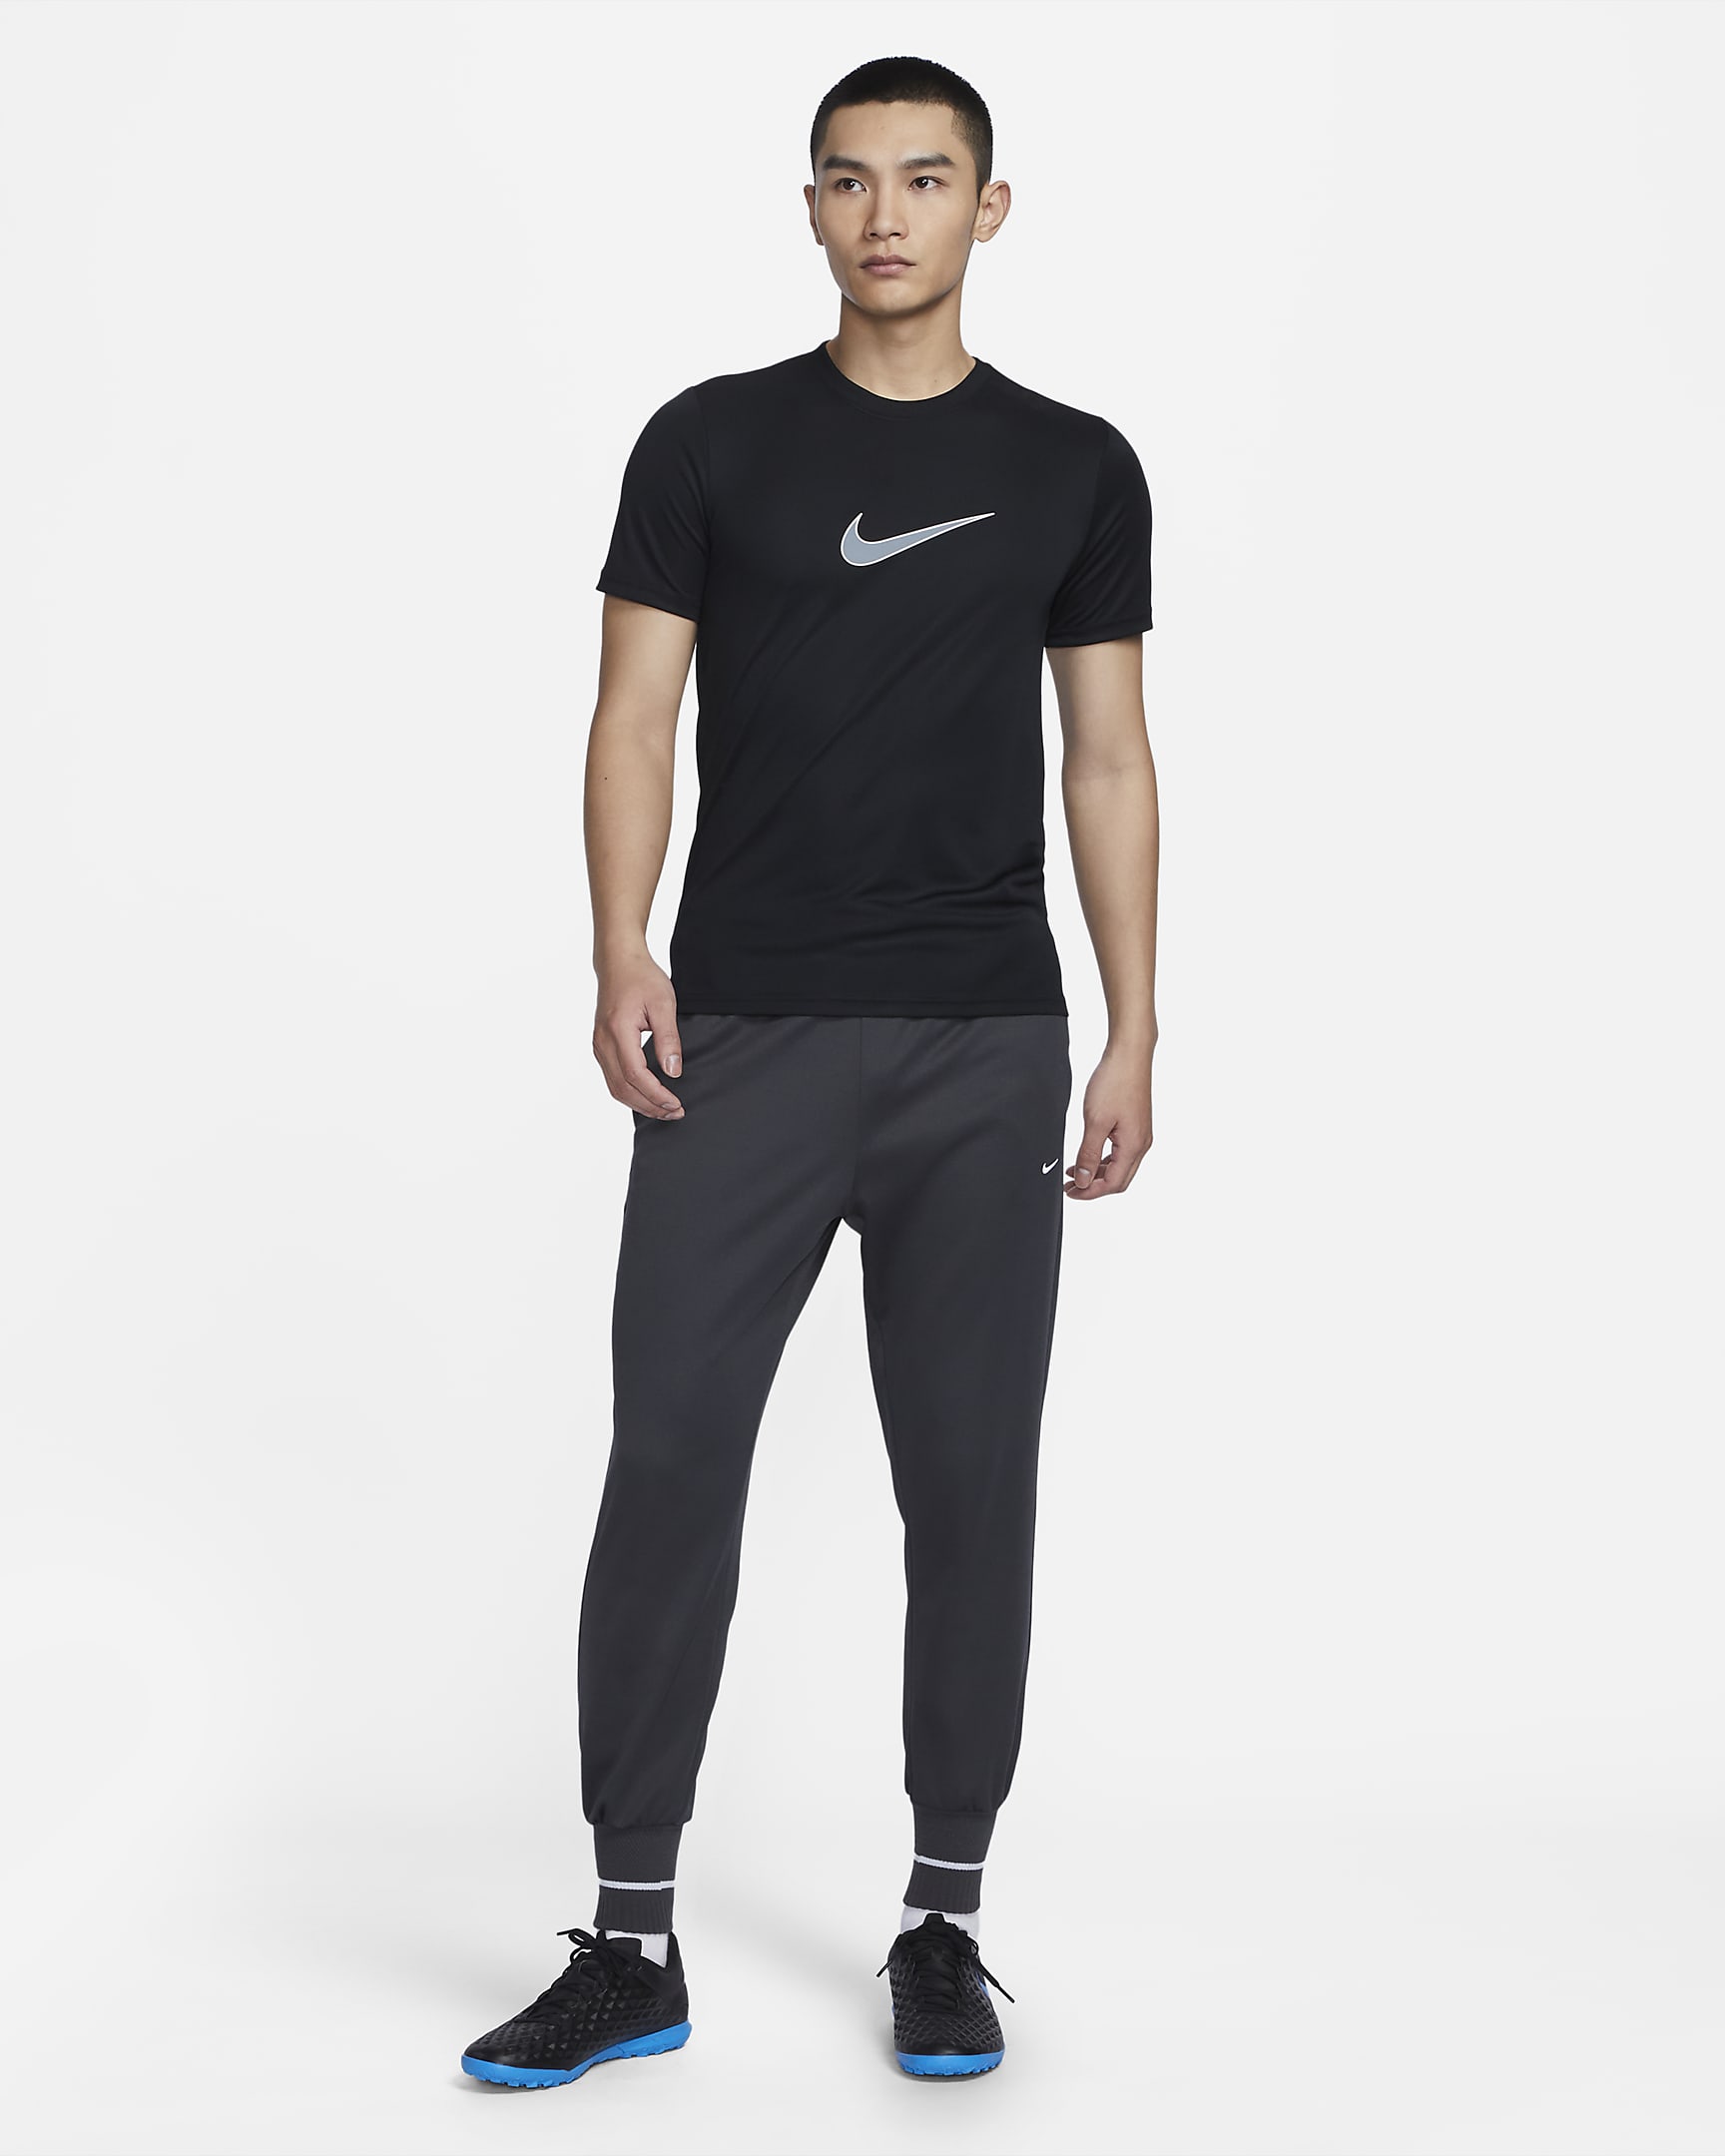 Nike Dri-FIT Academy Men's Short-Sleeve Graphic Football Top. Nike IN